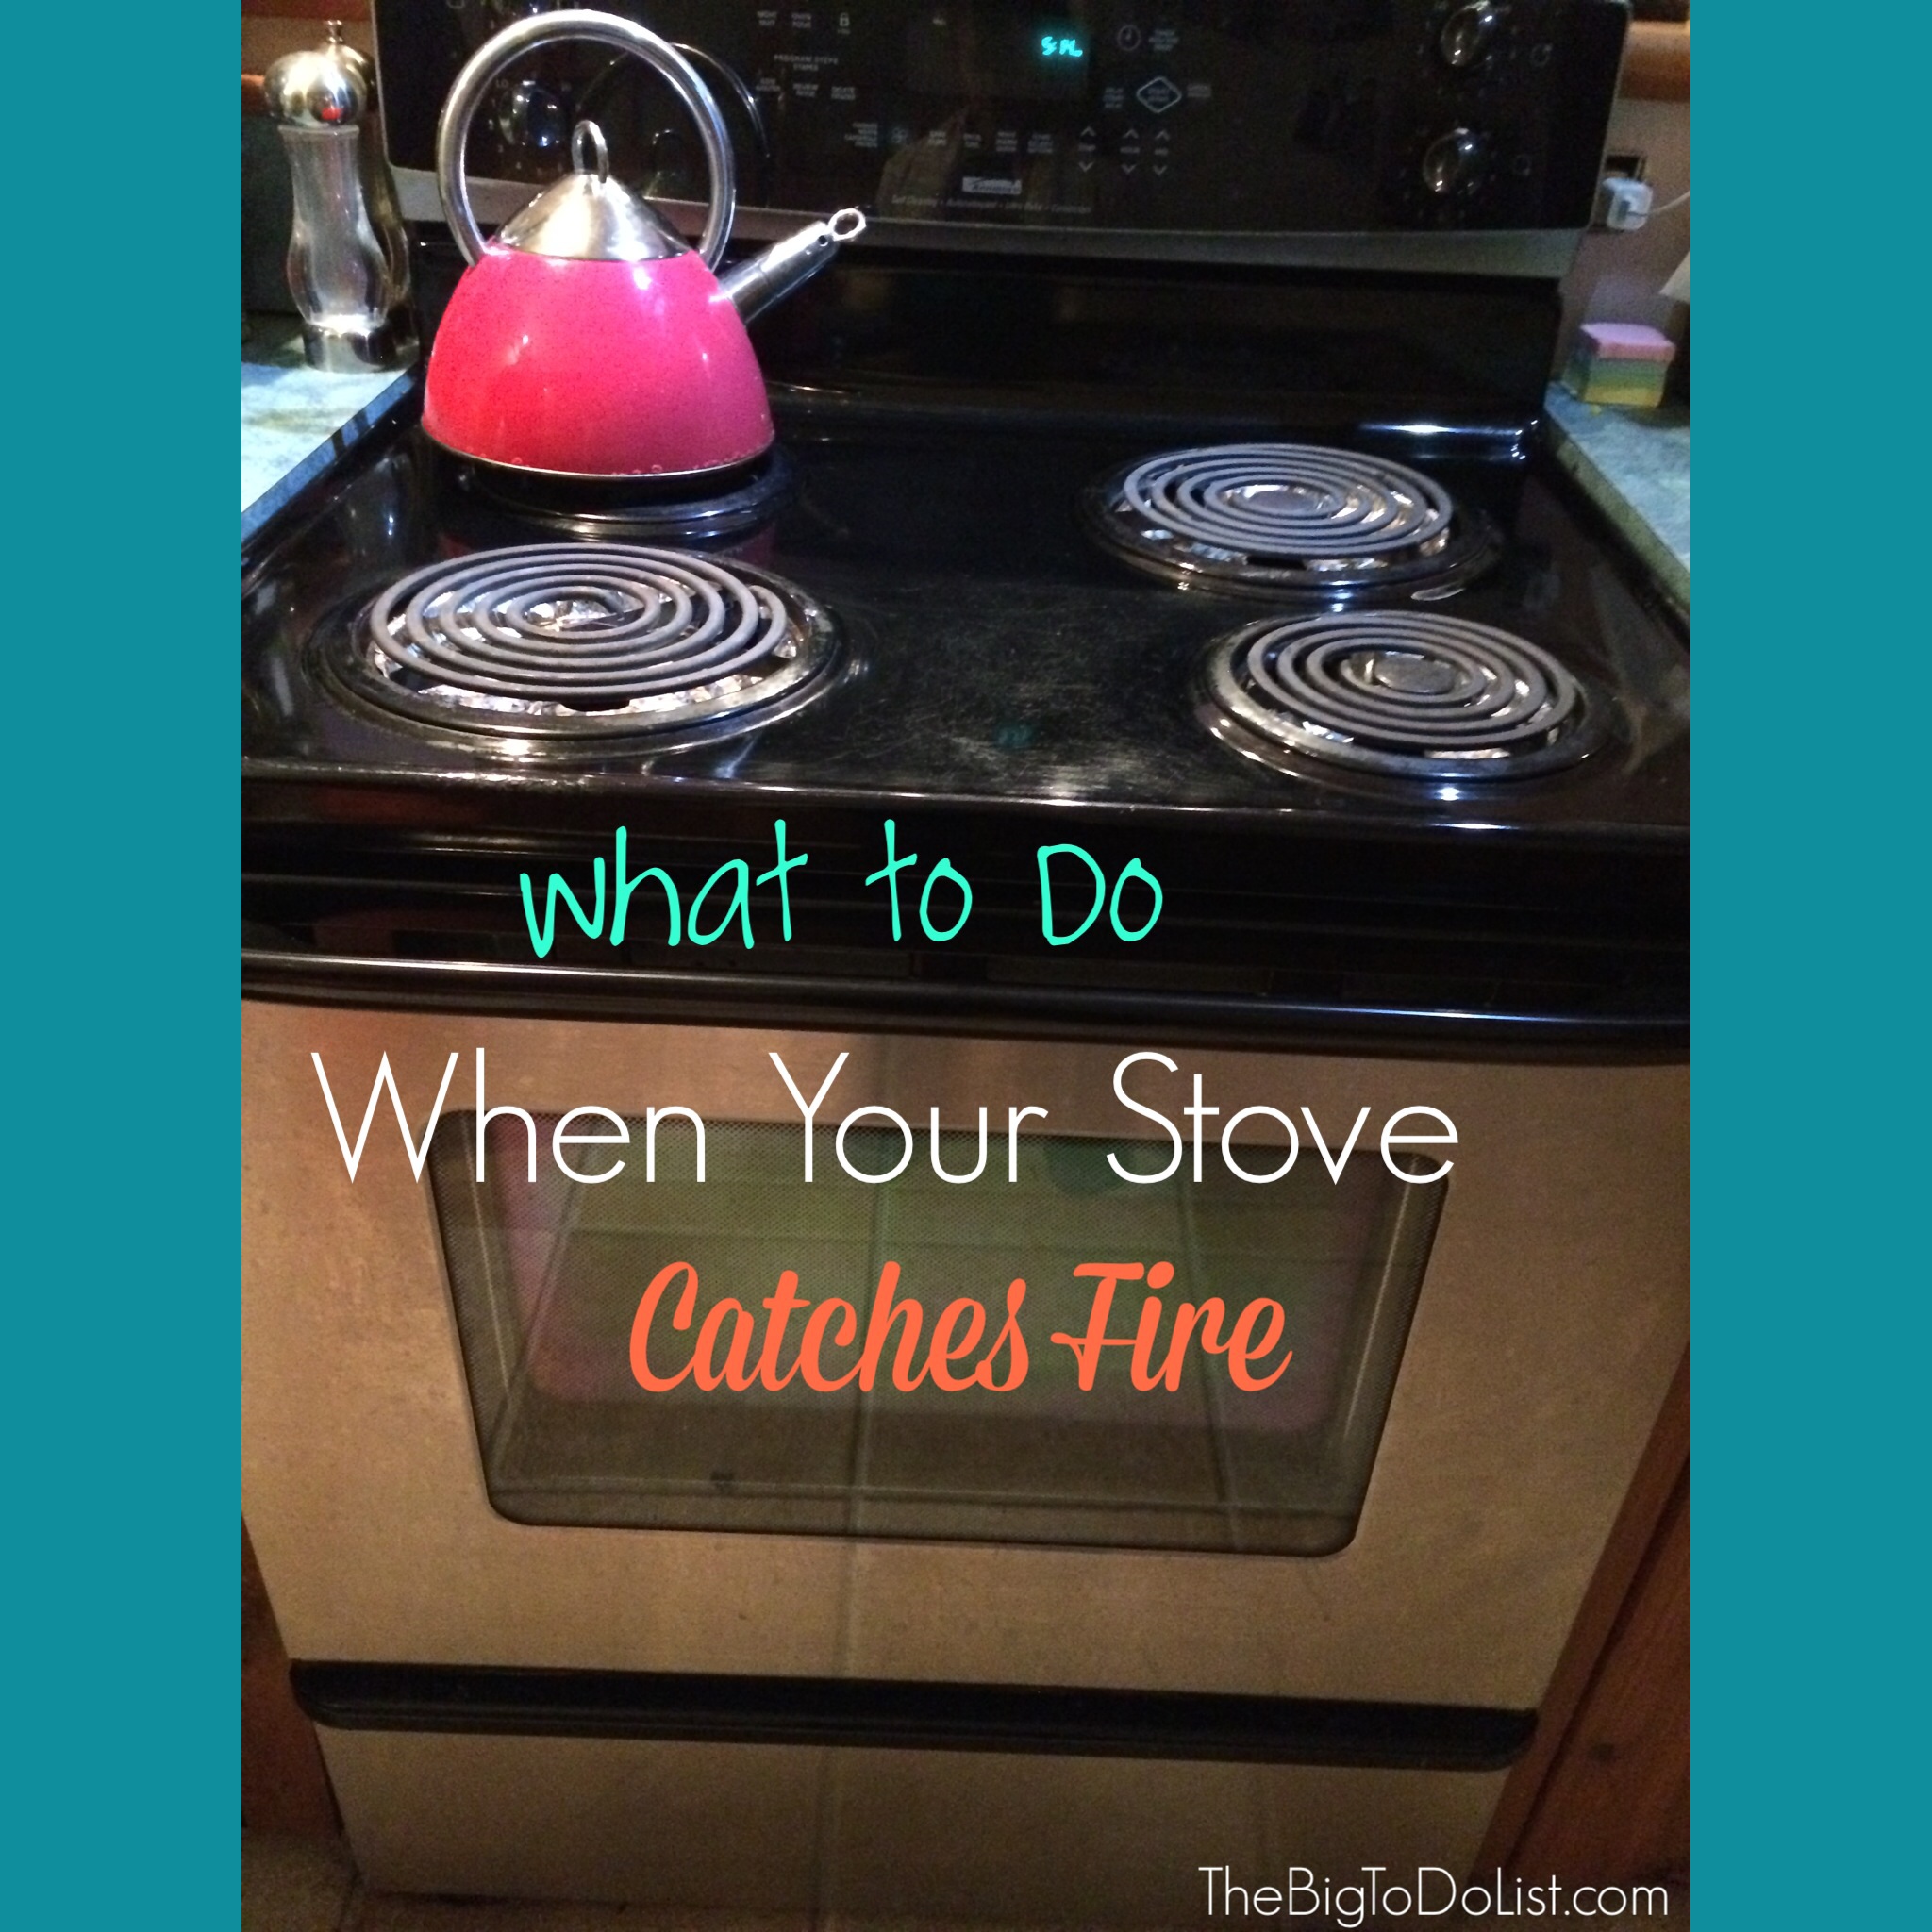 What to do when your stove catches fire